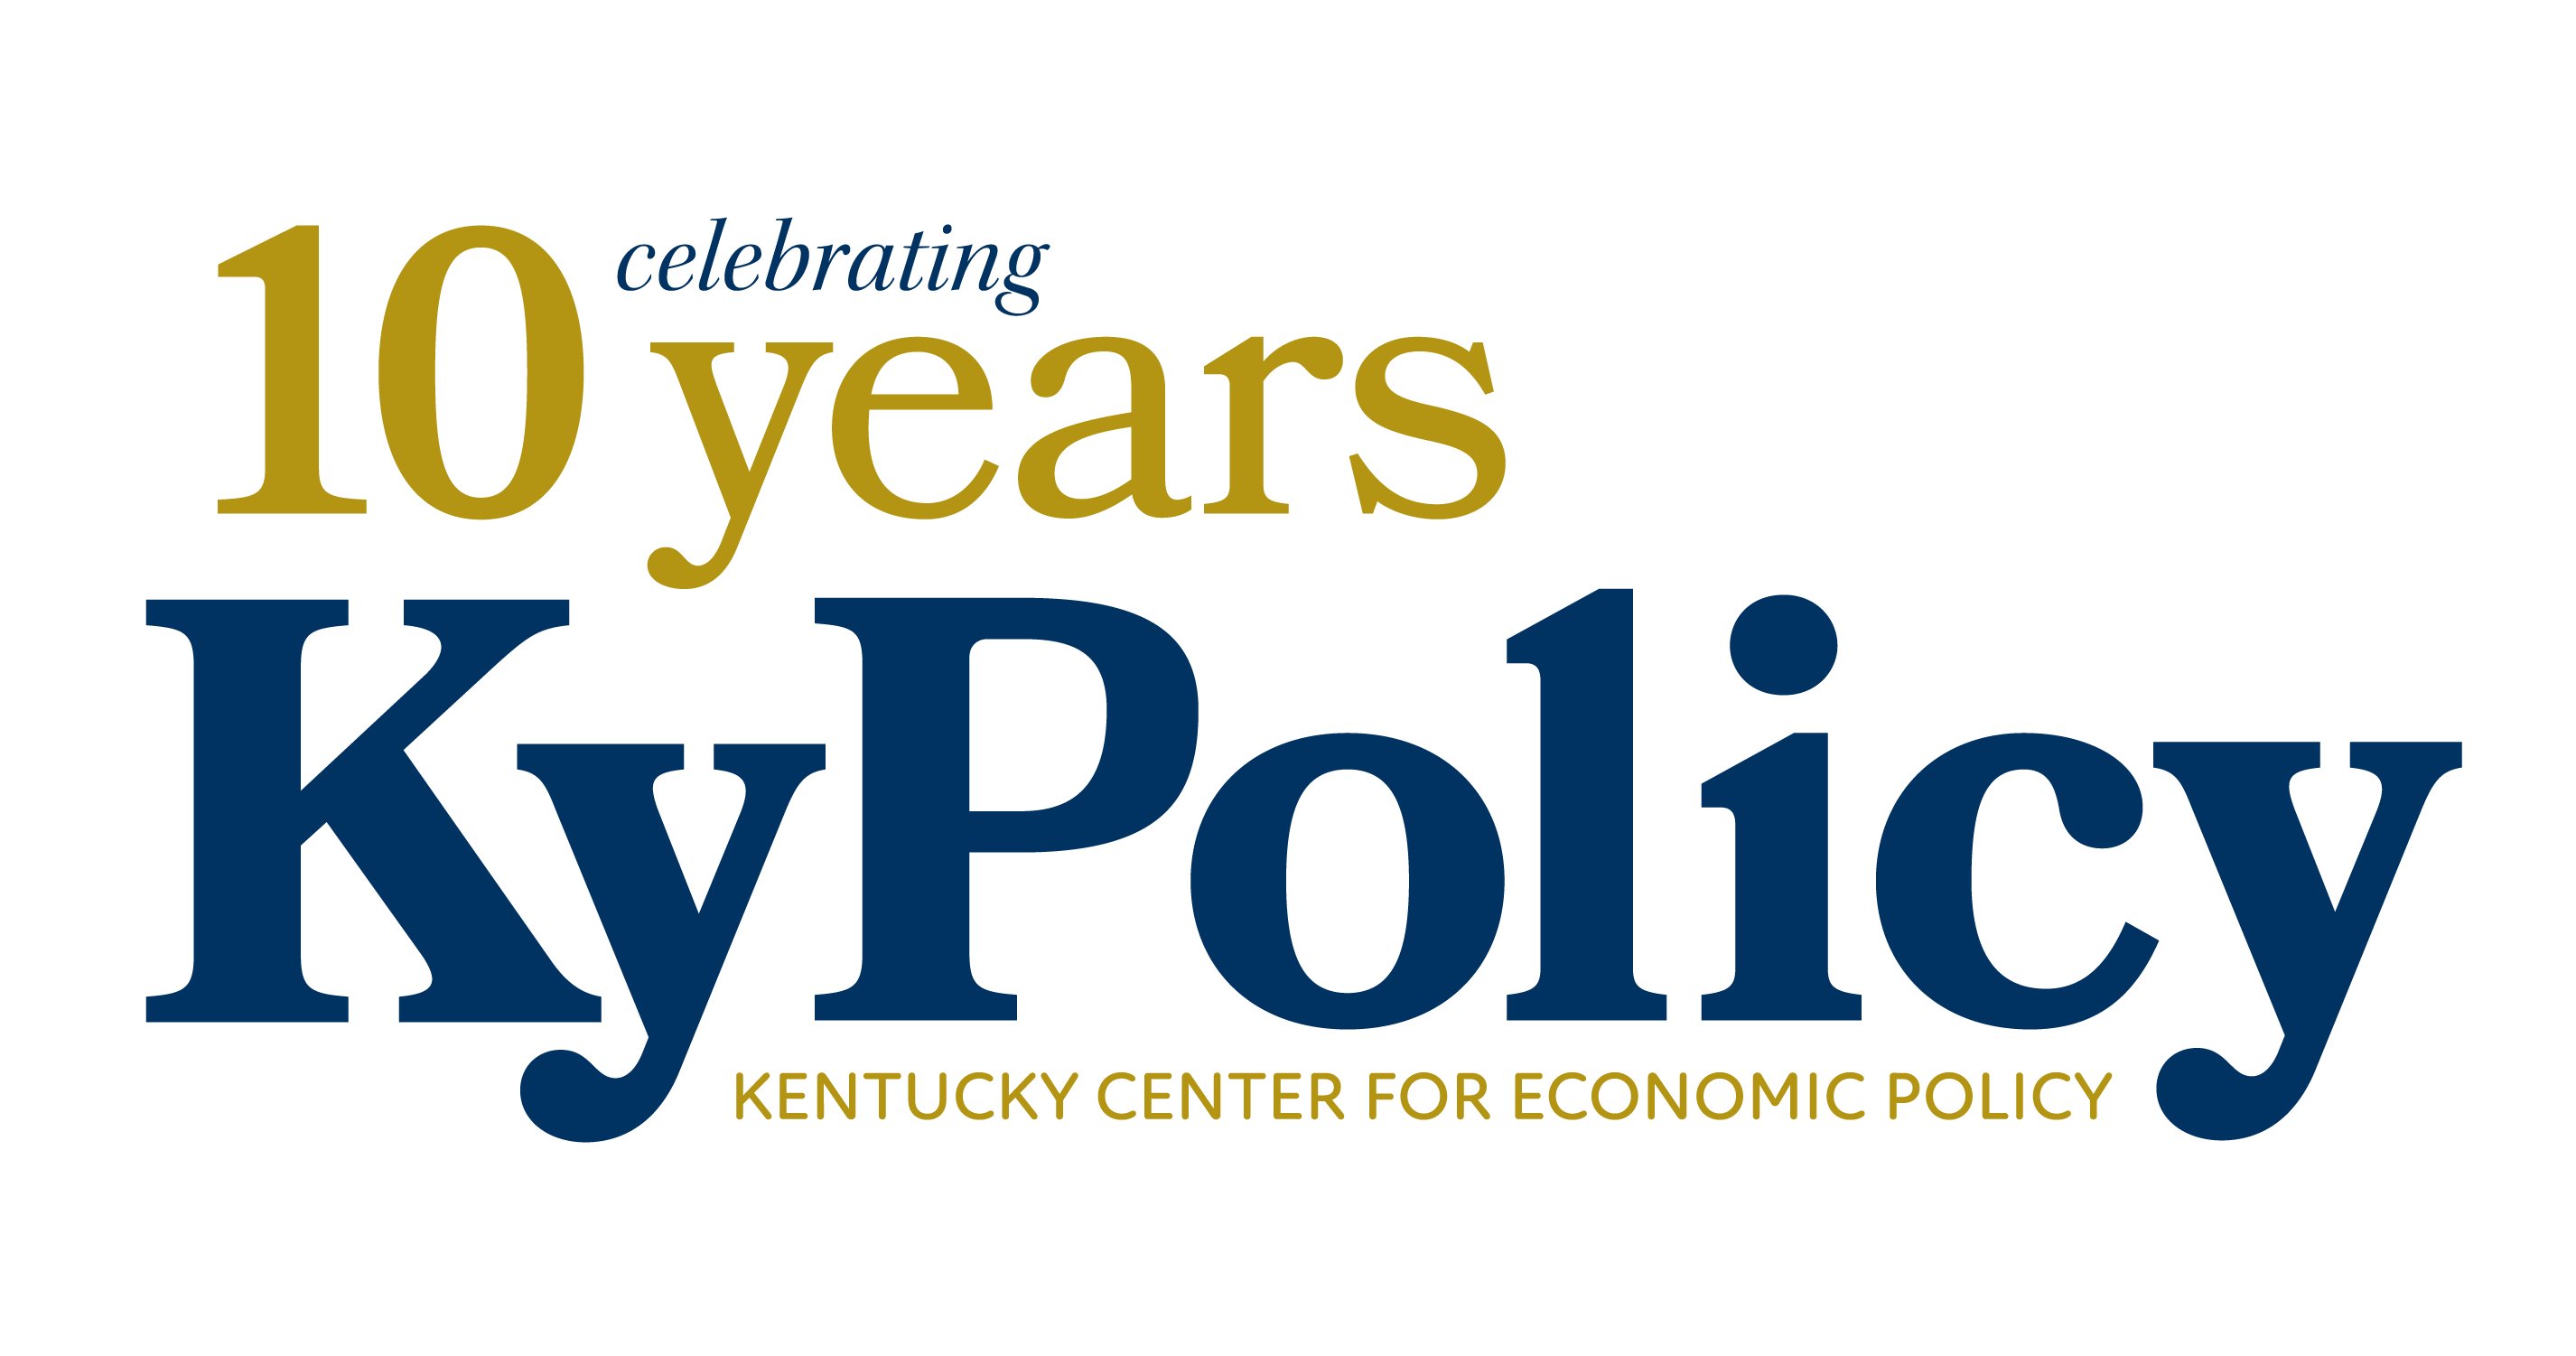 cropped KyPolicy 10 year anniversary 1 navy